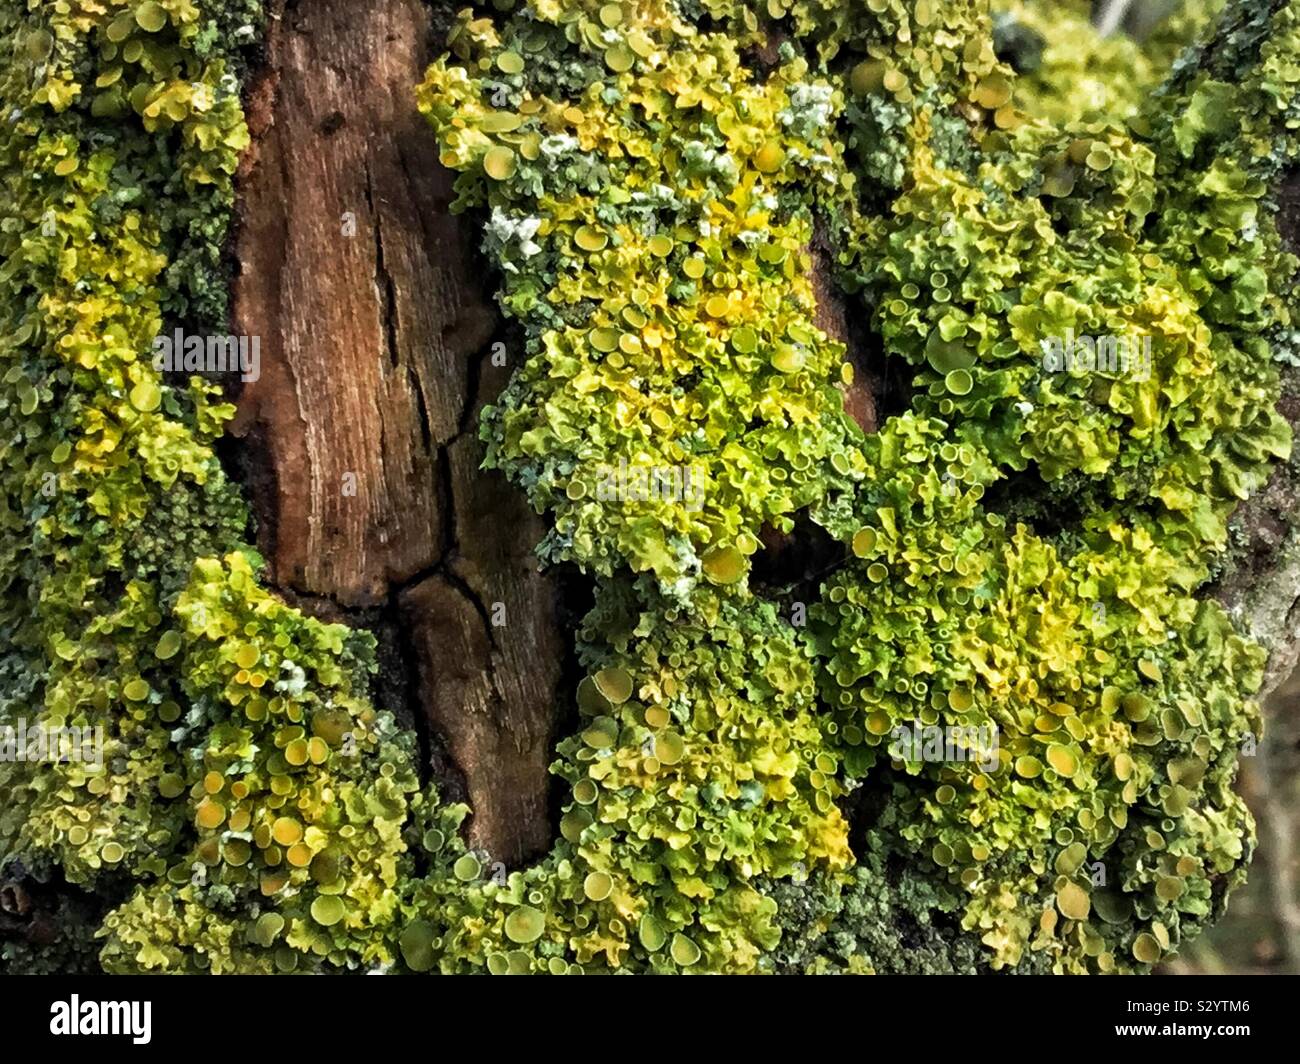 Amazed by these mesmerizing features of green and brown... Stock Photo